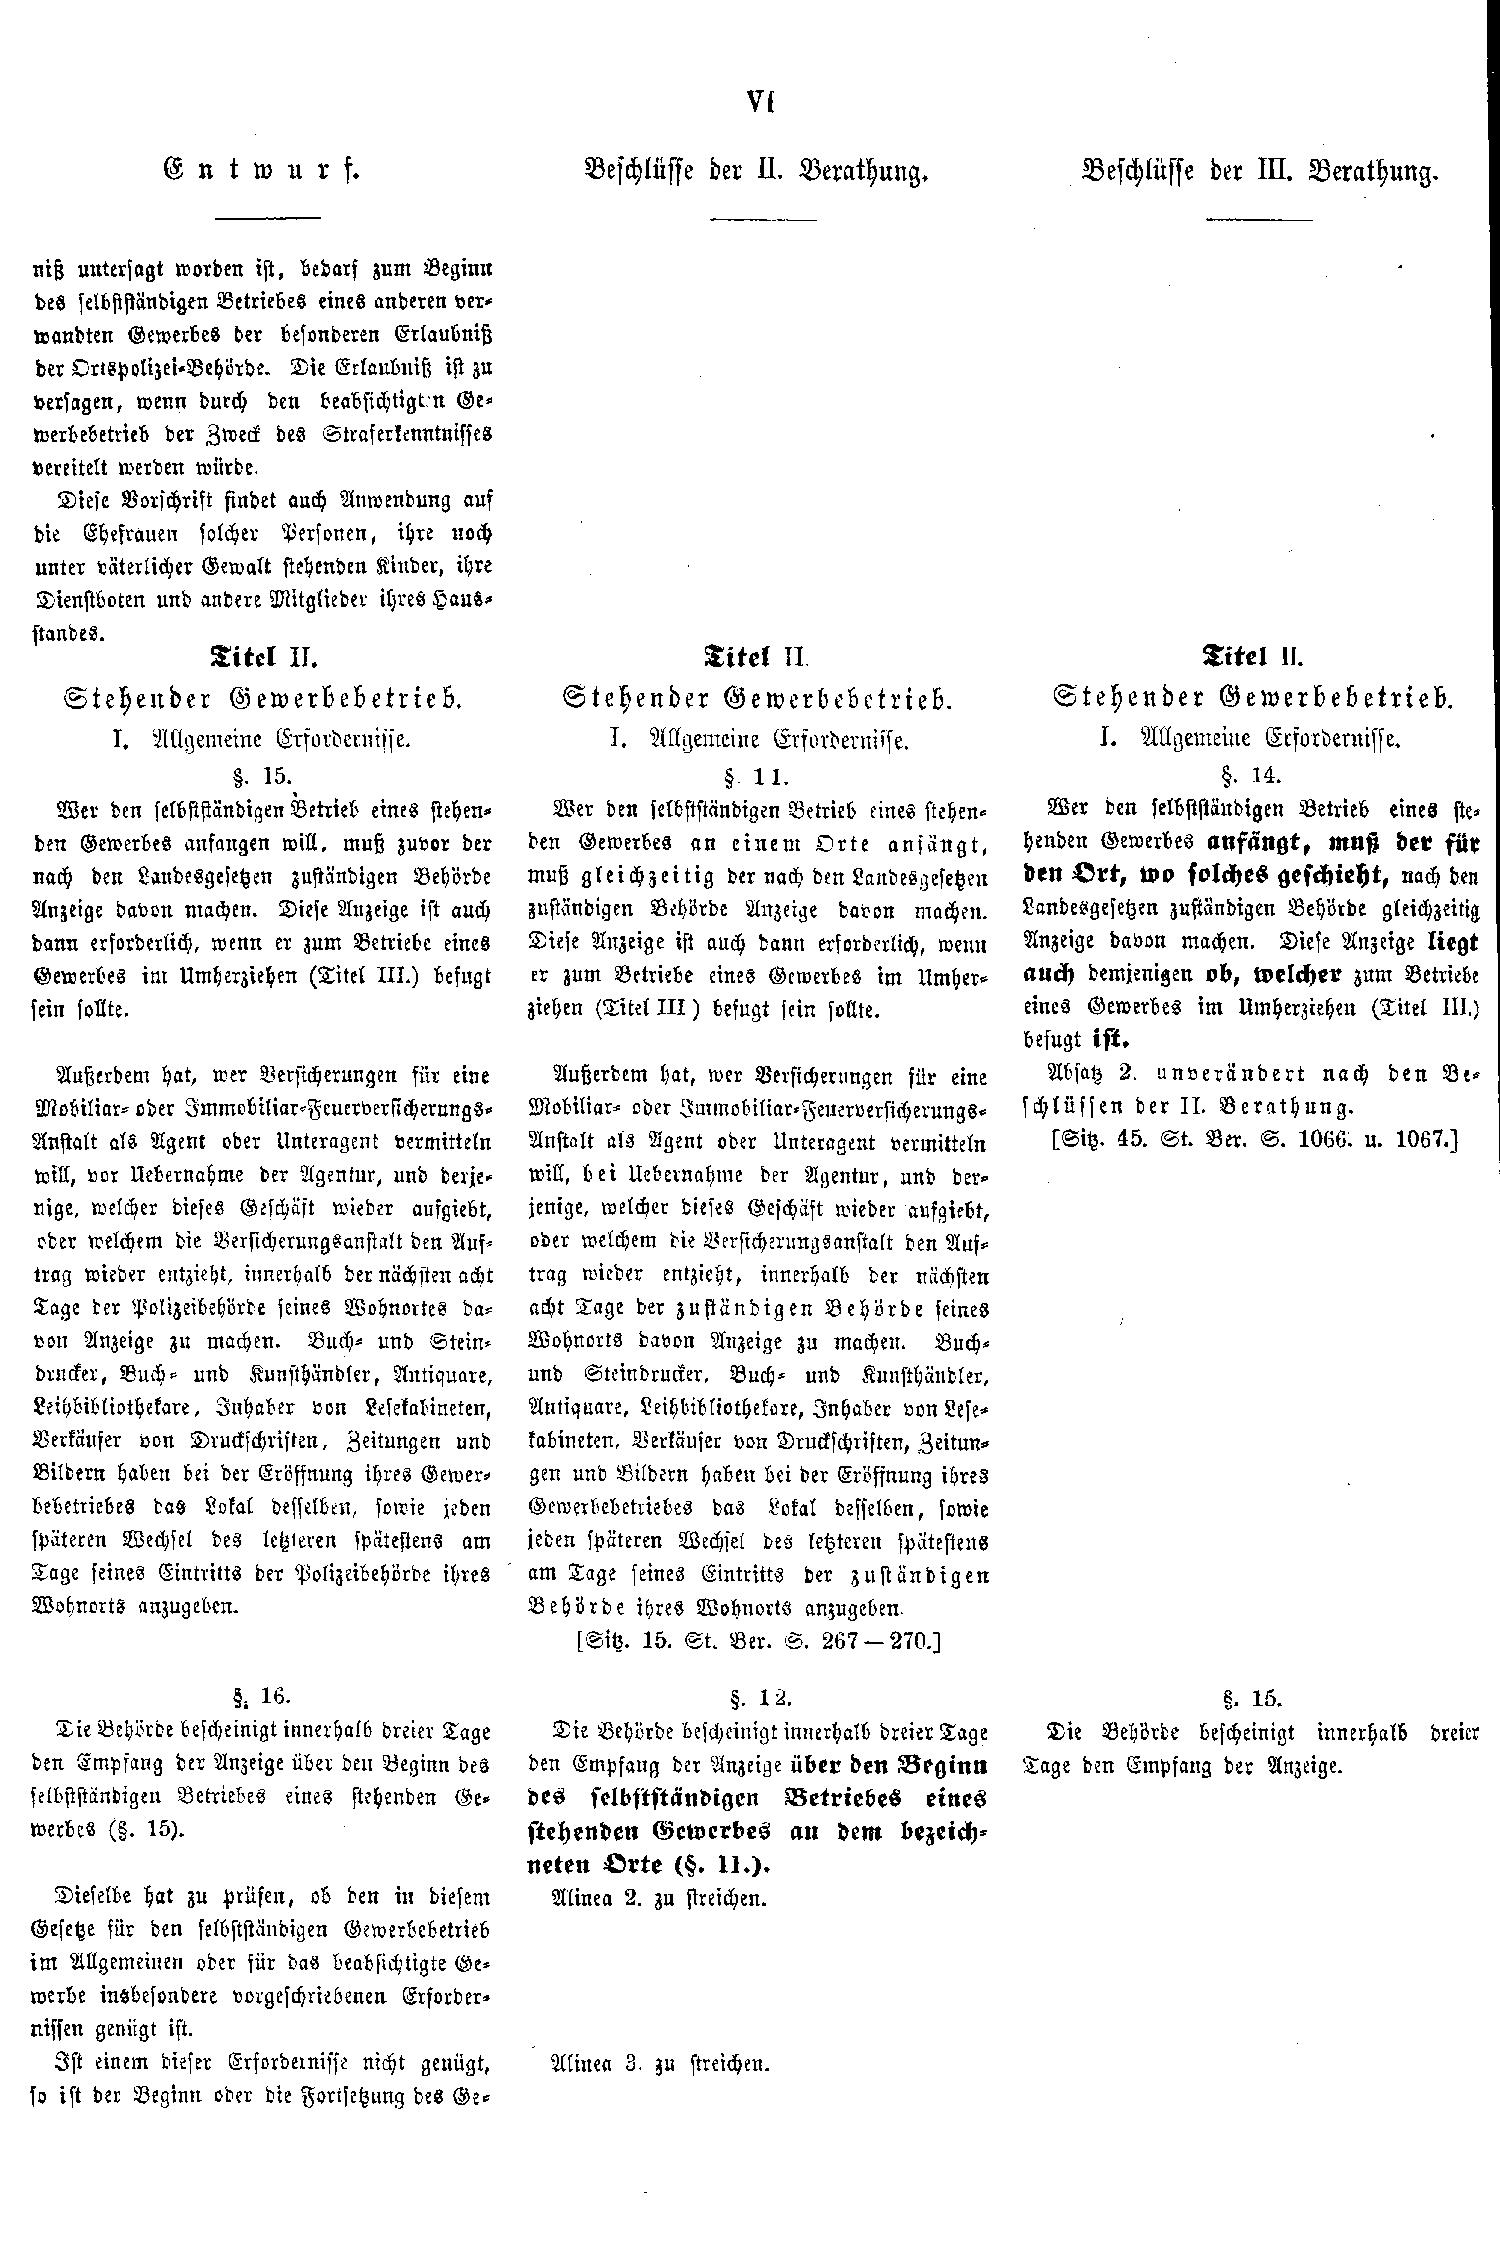 Scan of page VI